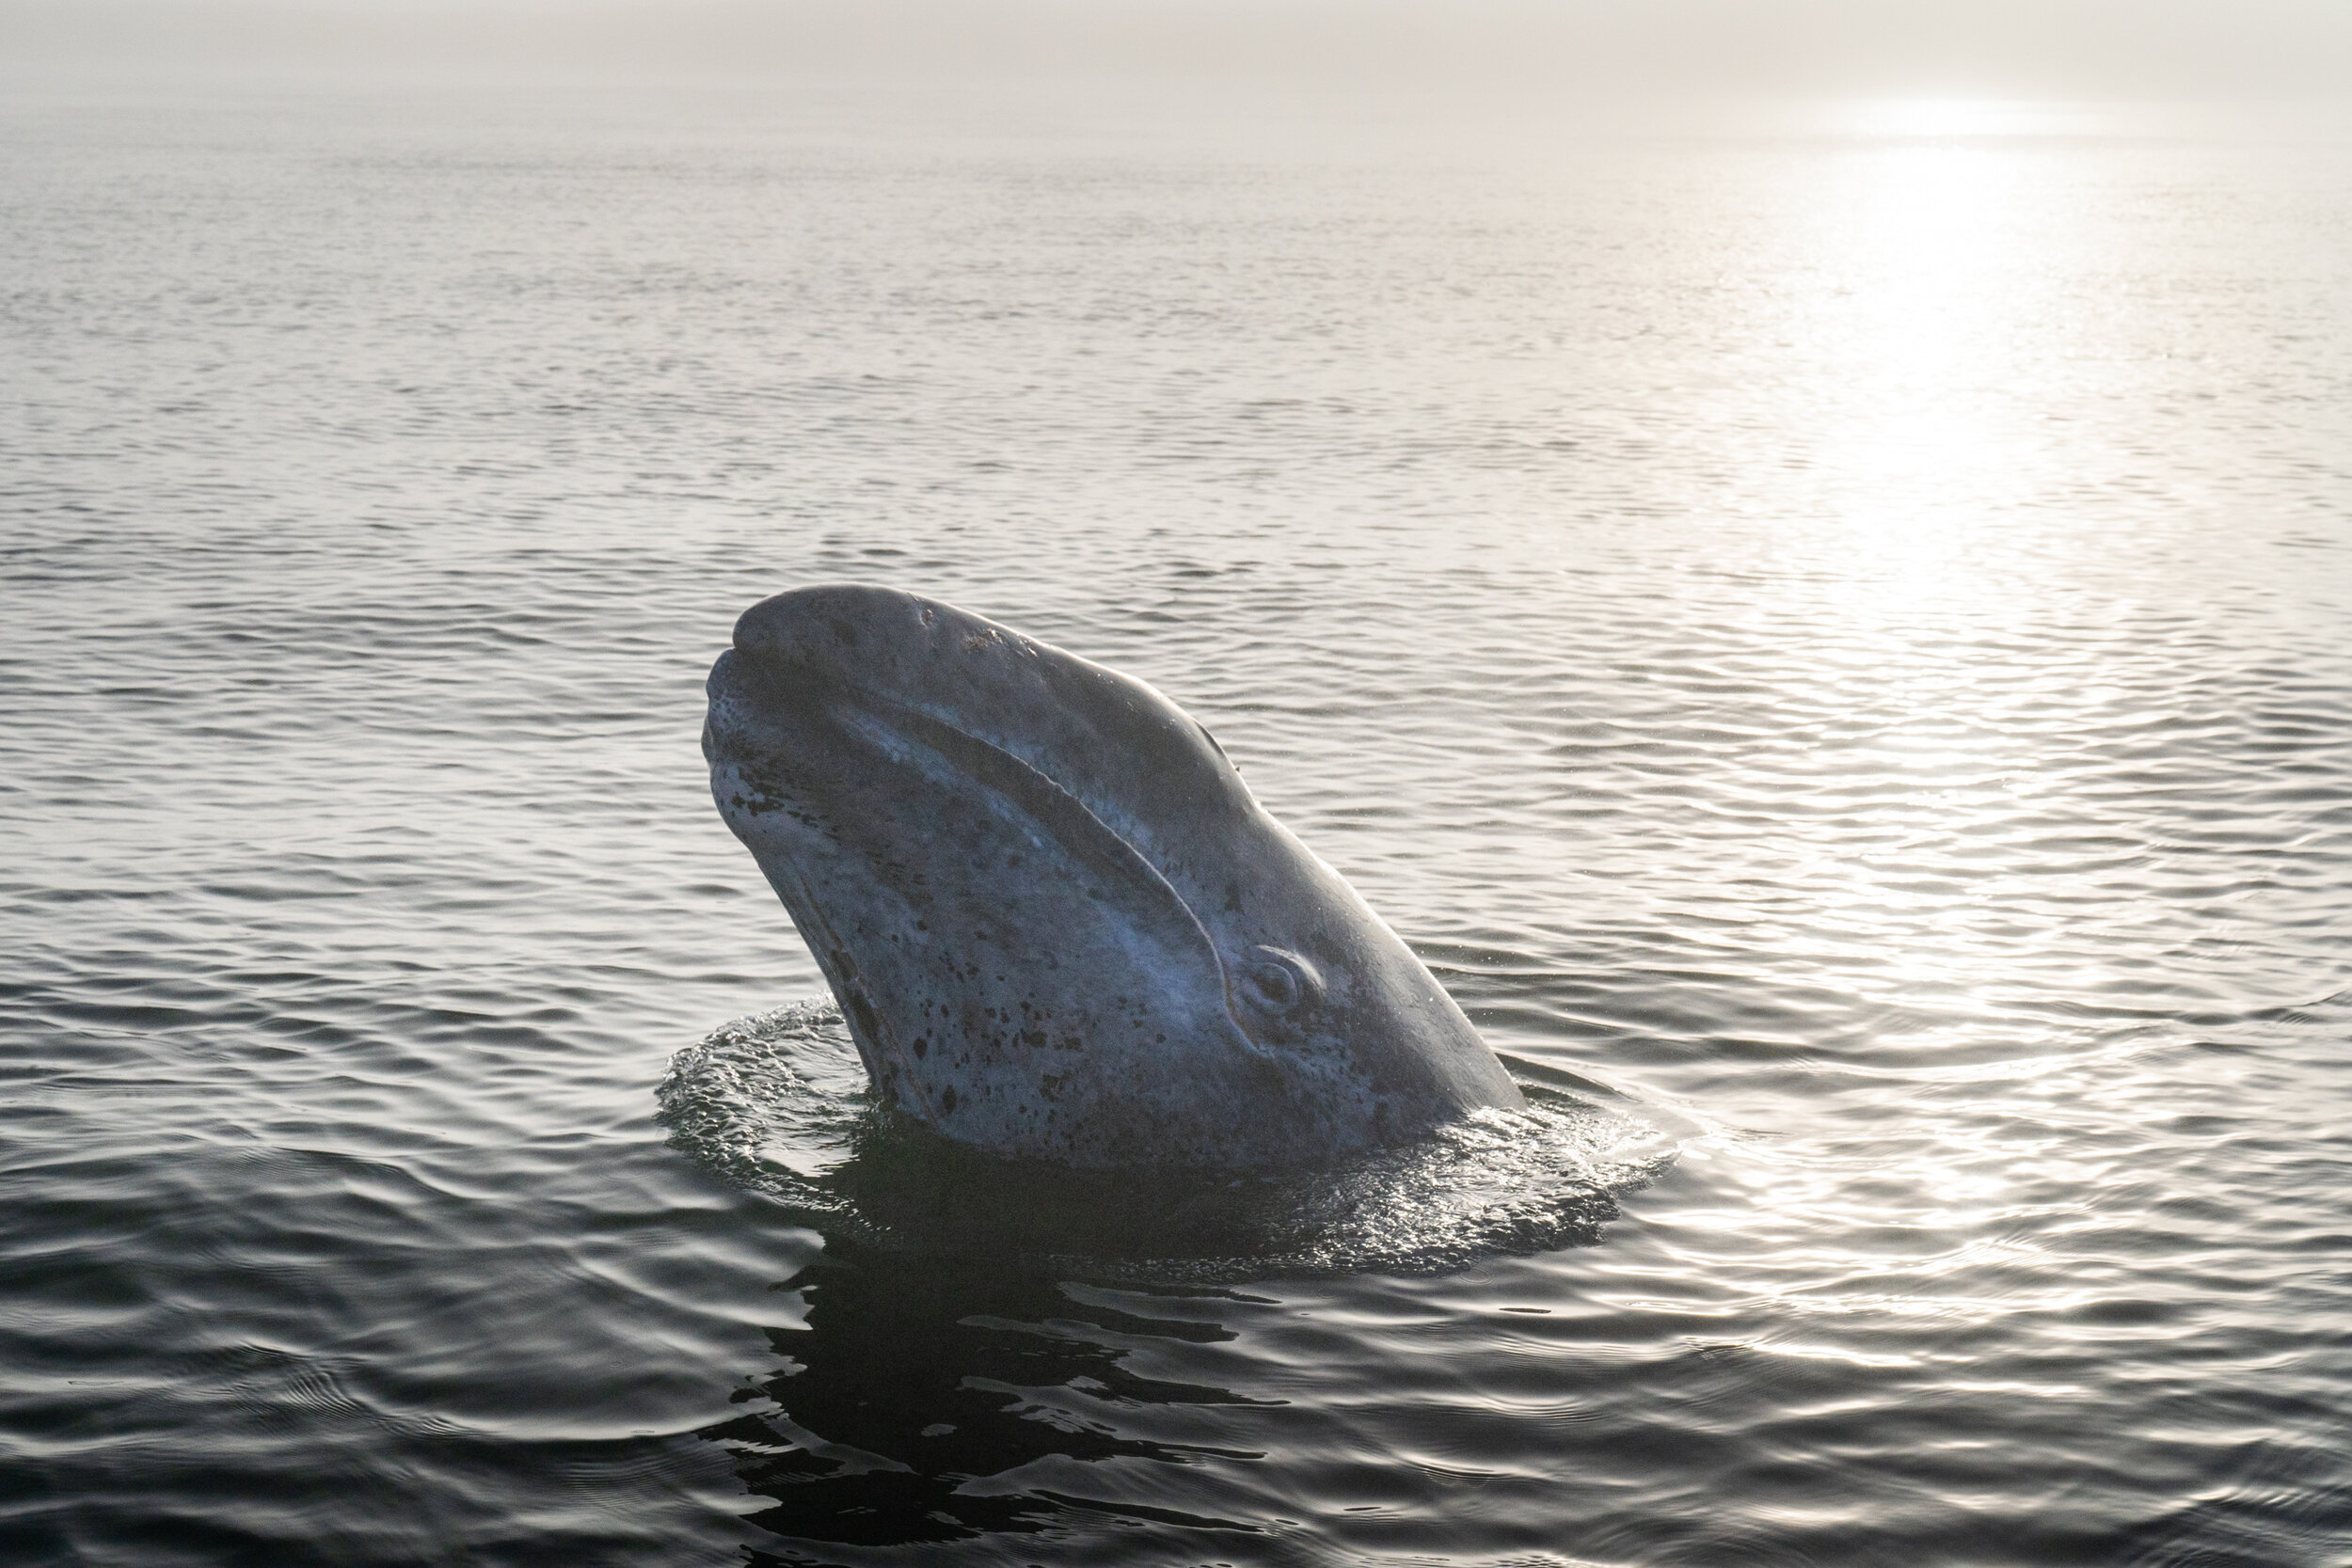 A gray whale breaches the water surface at sunrise in Baja California, Mexico